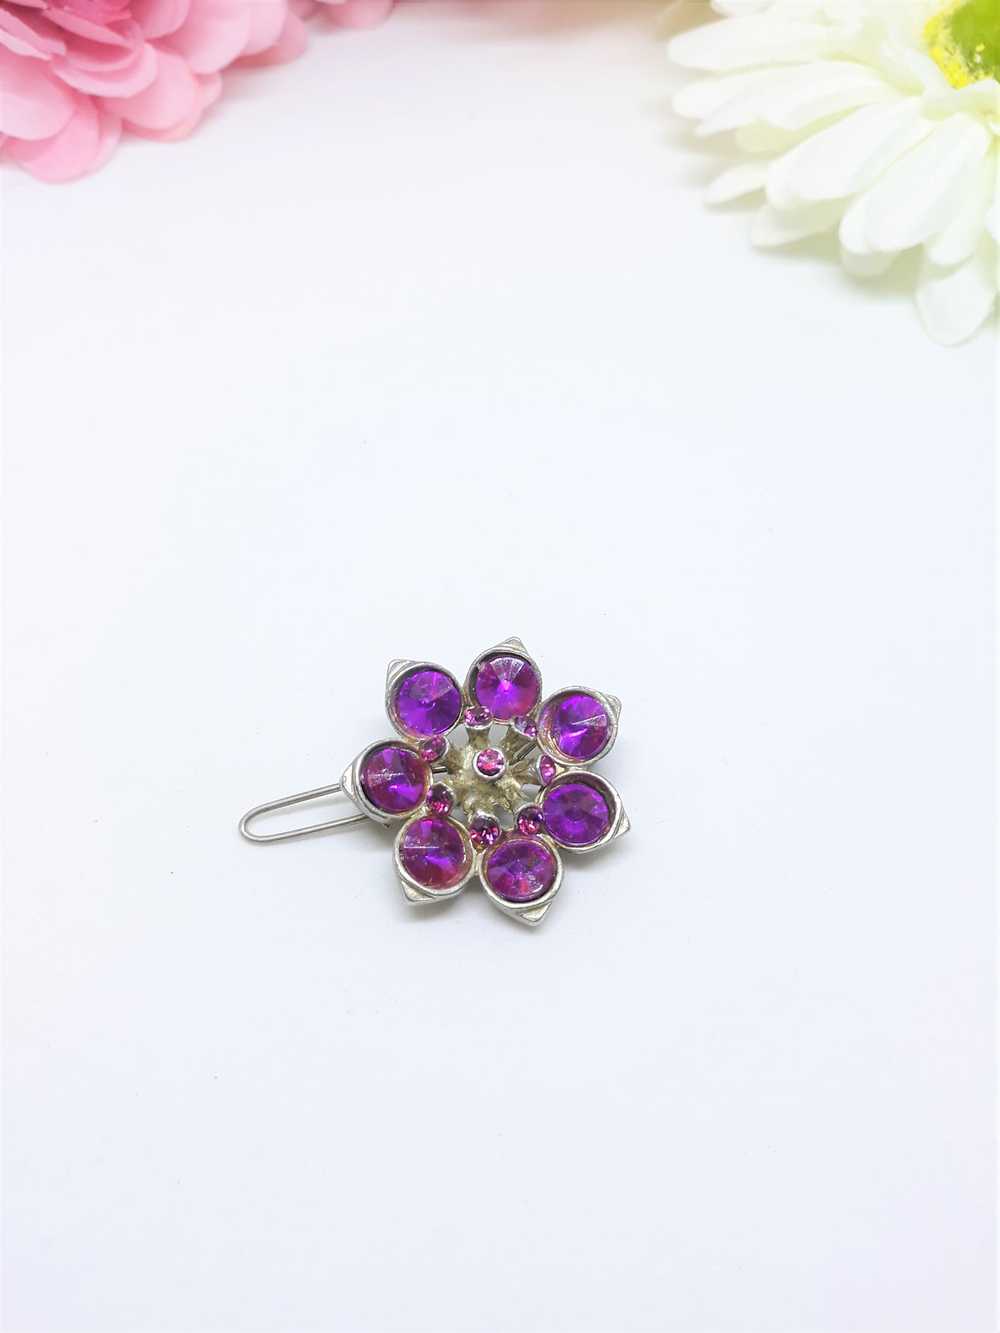 Gorgeous 1950s Purple Floral Hair Pin - image 1